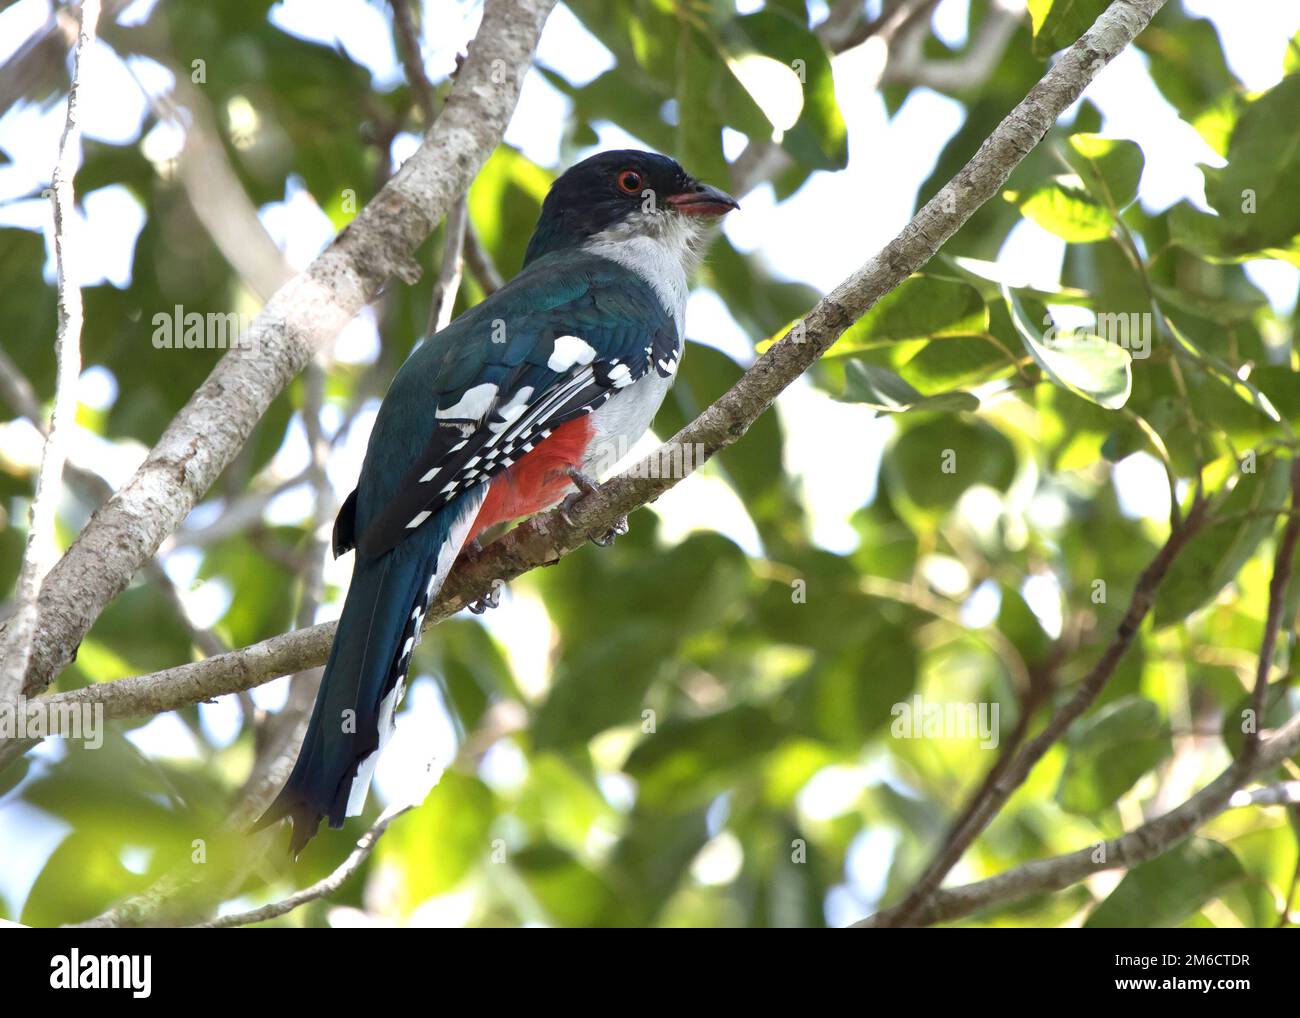 Cuban trogon or tocororo that sits on a branch in the crowns of trees in the forest on a sunny day Stock Photo